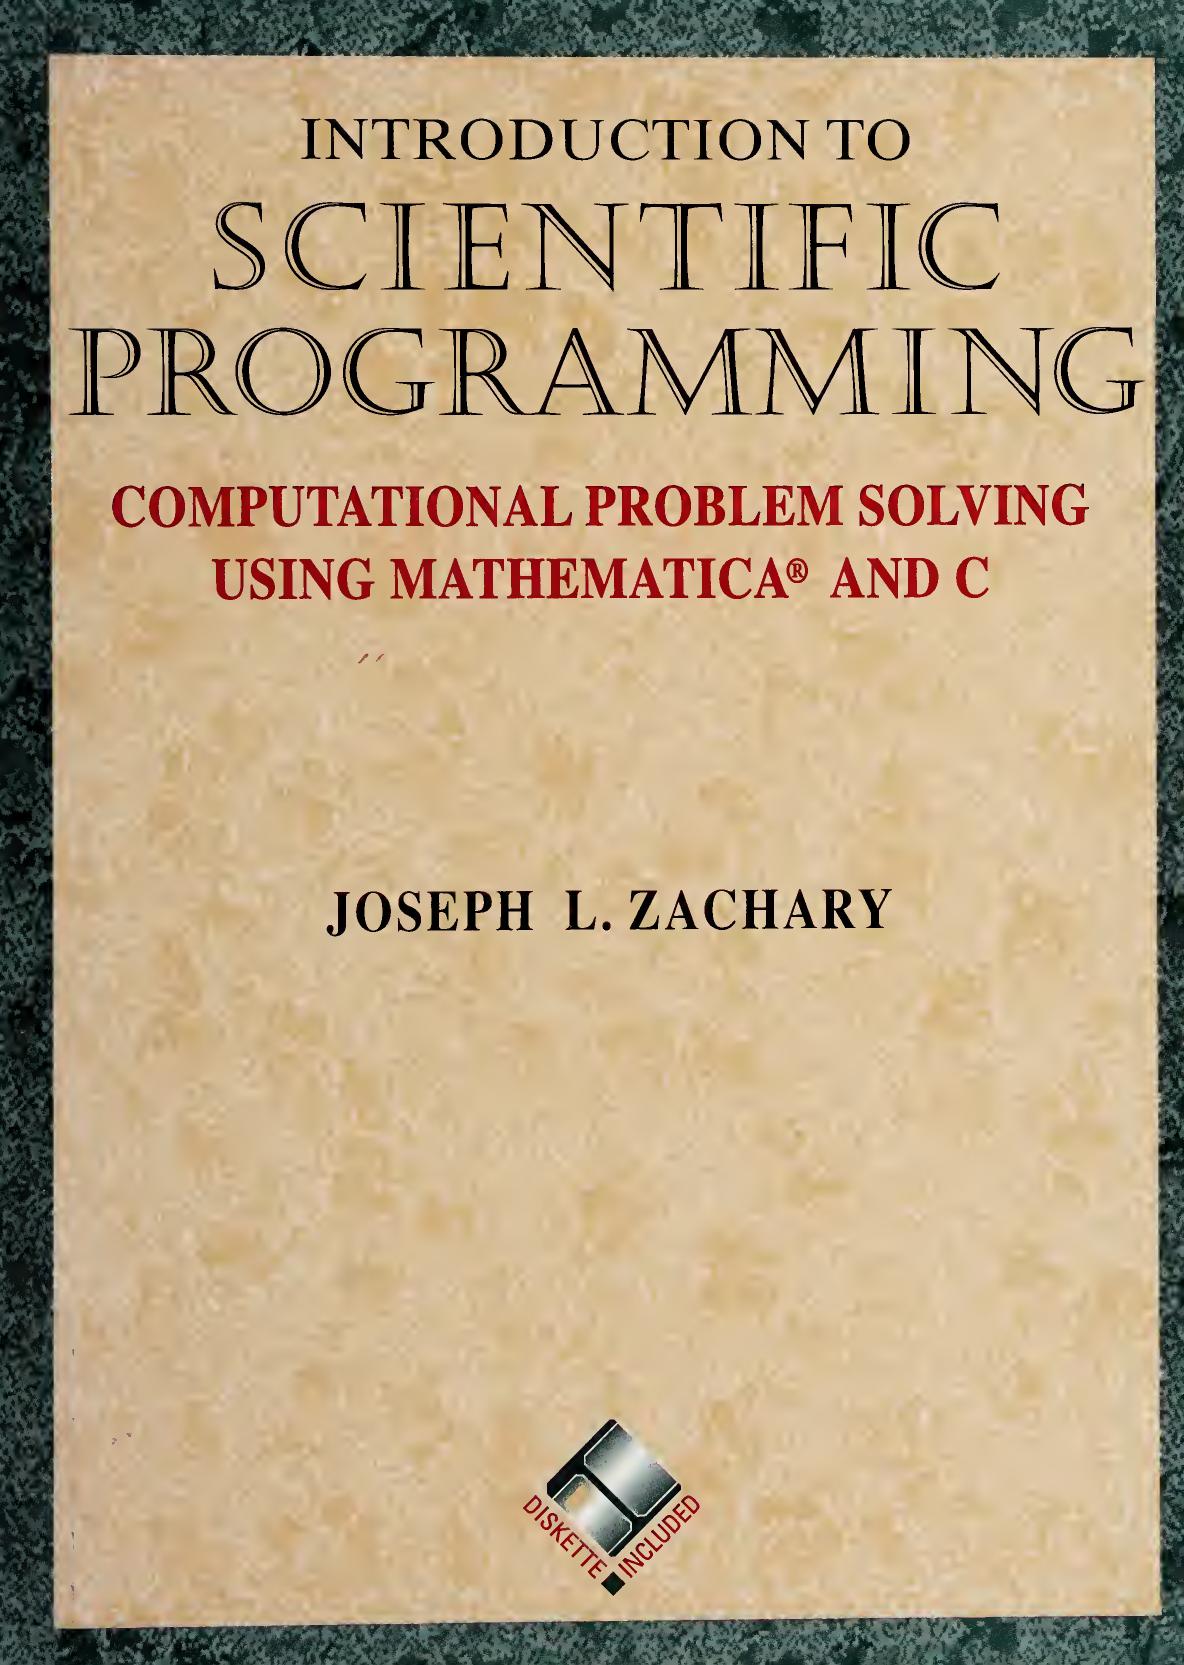 Introduction to scientific programming : computational problem solving with Mathematica® and C